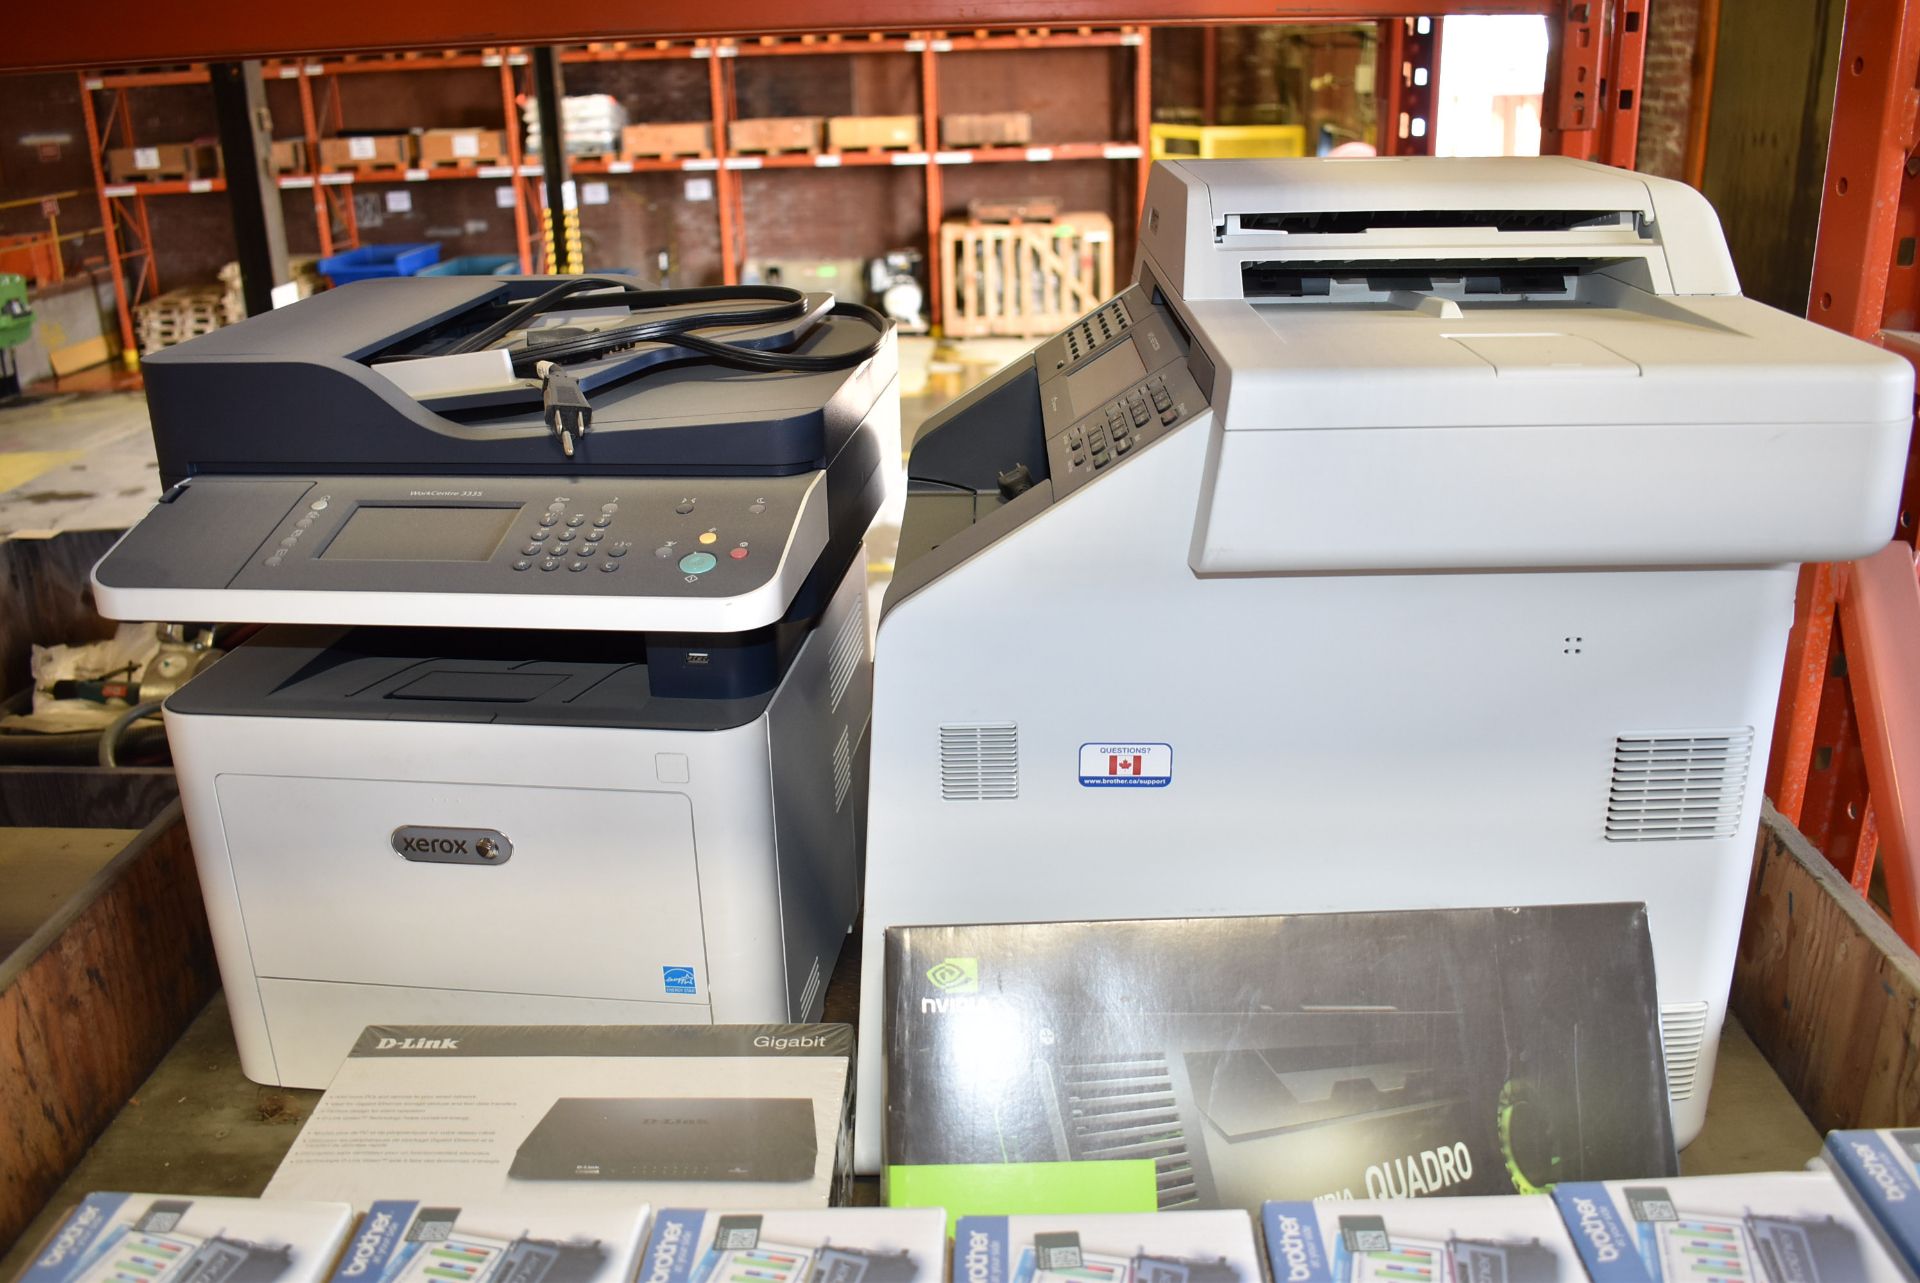 LOT/ BROTHER MFC-9970CDW COLOUR PRINTER, XEROX WORKCENTER 3335 MUTLIFUNCTION PRINTER, NVIDIA PC - Image 3 of 5